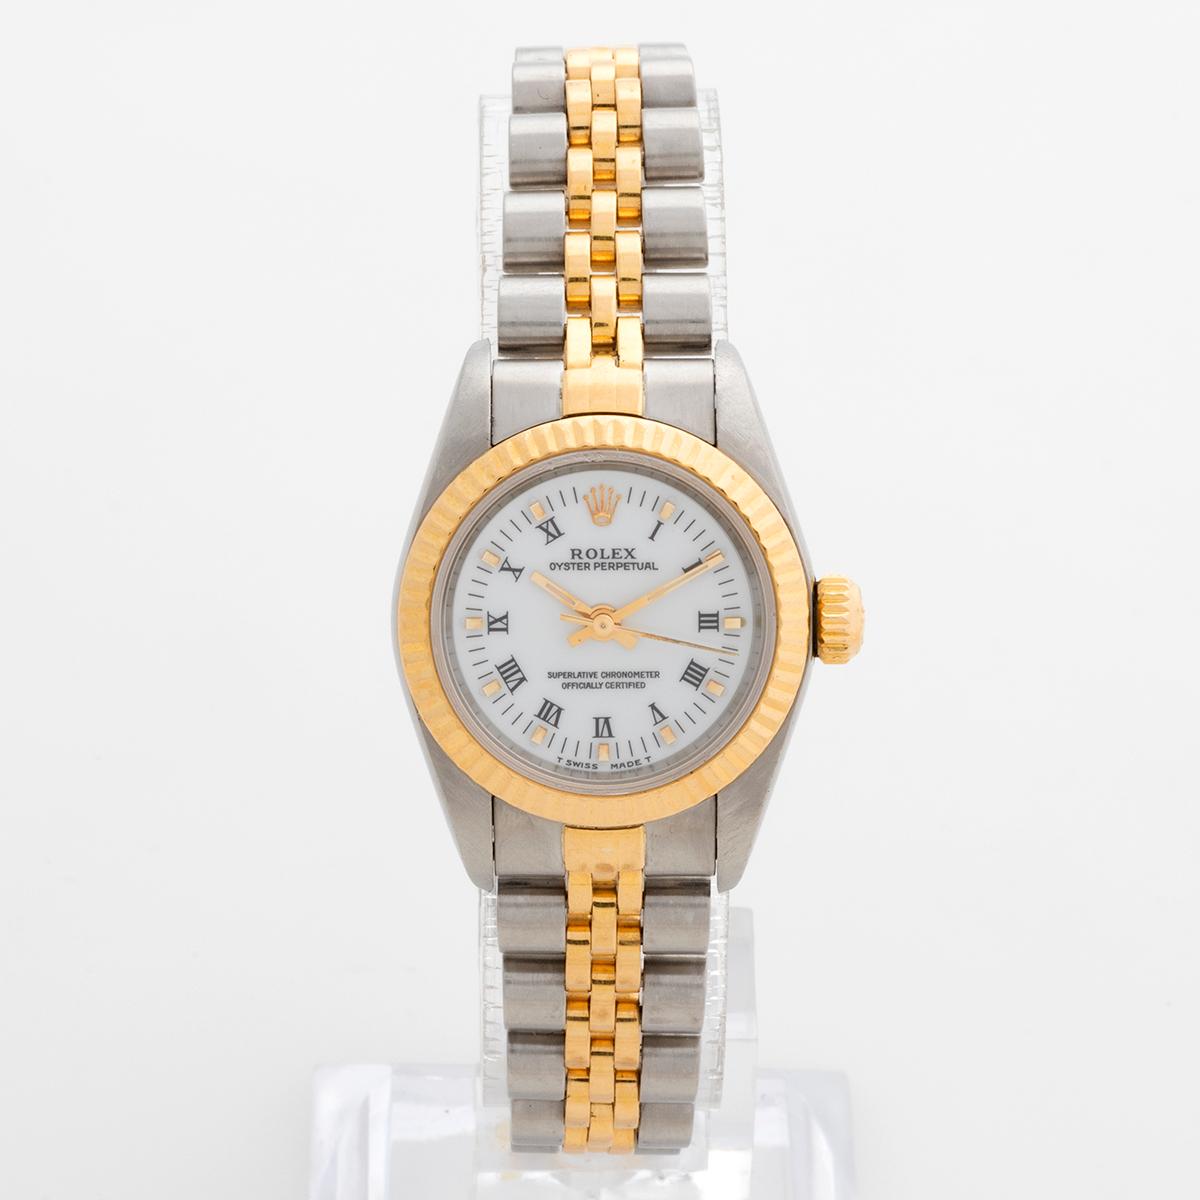 Our classic neo vintage Lady Rolex Oyster Perpetual features a 26mm stainless steel and yellow gold case and stainless steel and yellow gold jubilee bracelet and notably a white roman numeral dial. This reference 67193 is presented in excellent